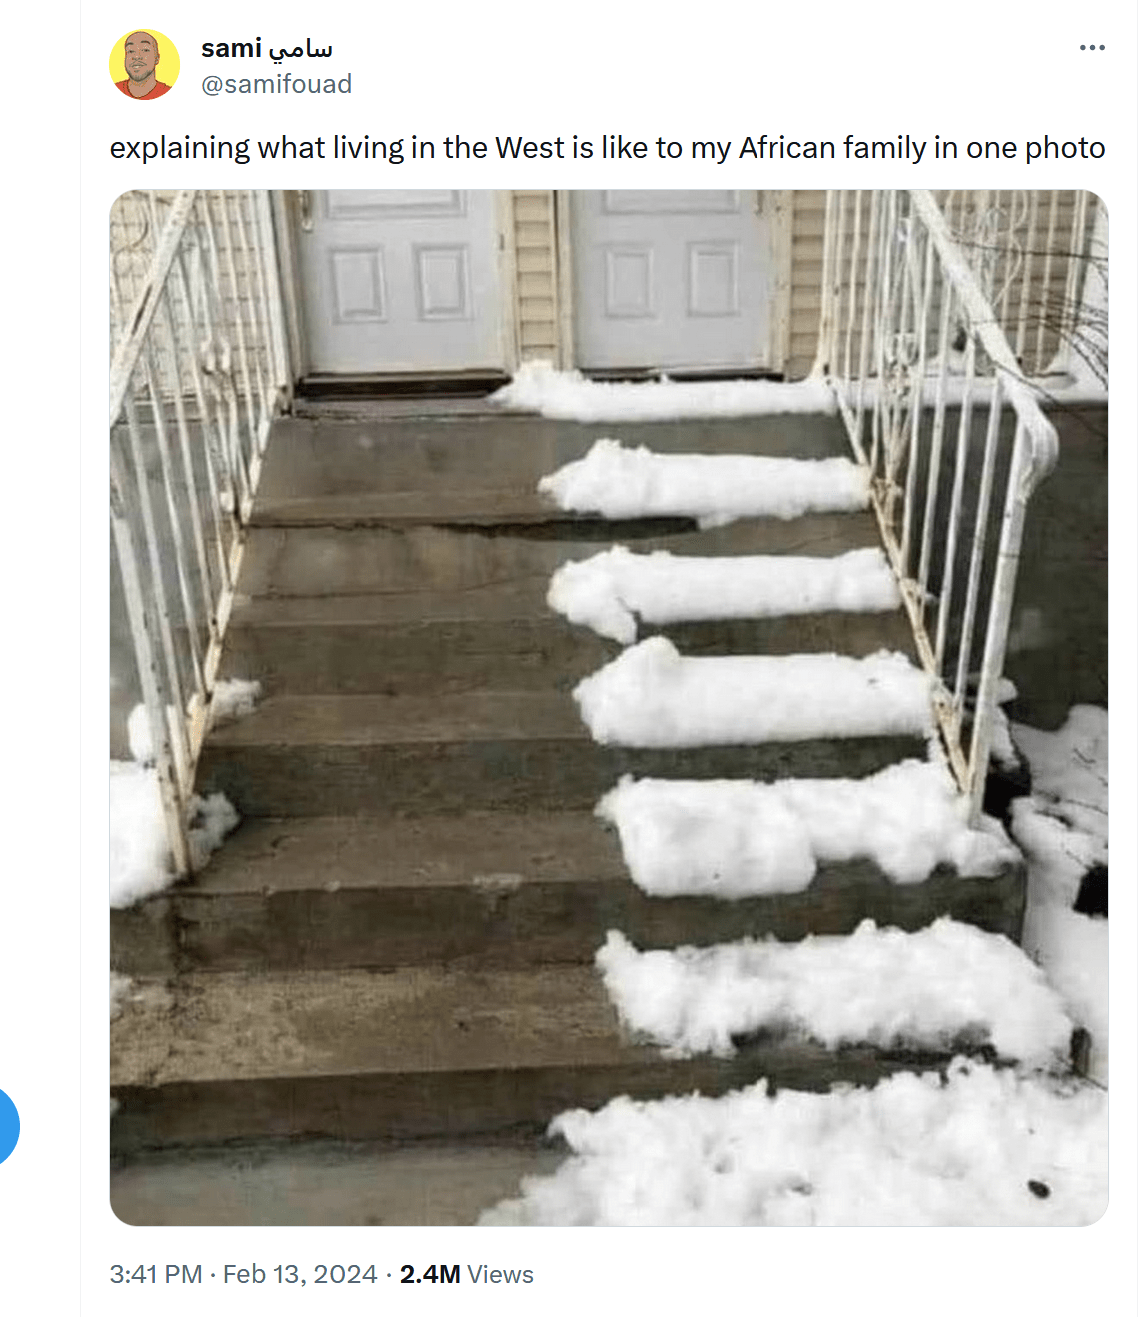 Screenshot of a tweet containing a photograph from user @samifouad with the caption "explaining what living in the West is like to my African family in one photo"

The photo shows shared steps up to two doorways. The snow has been cleared on one half of the steps, but not the other half.